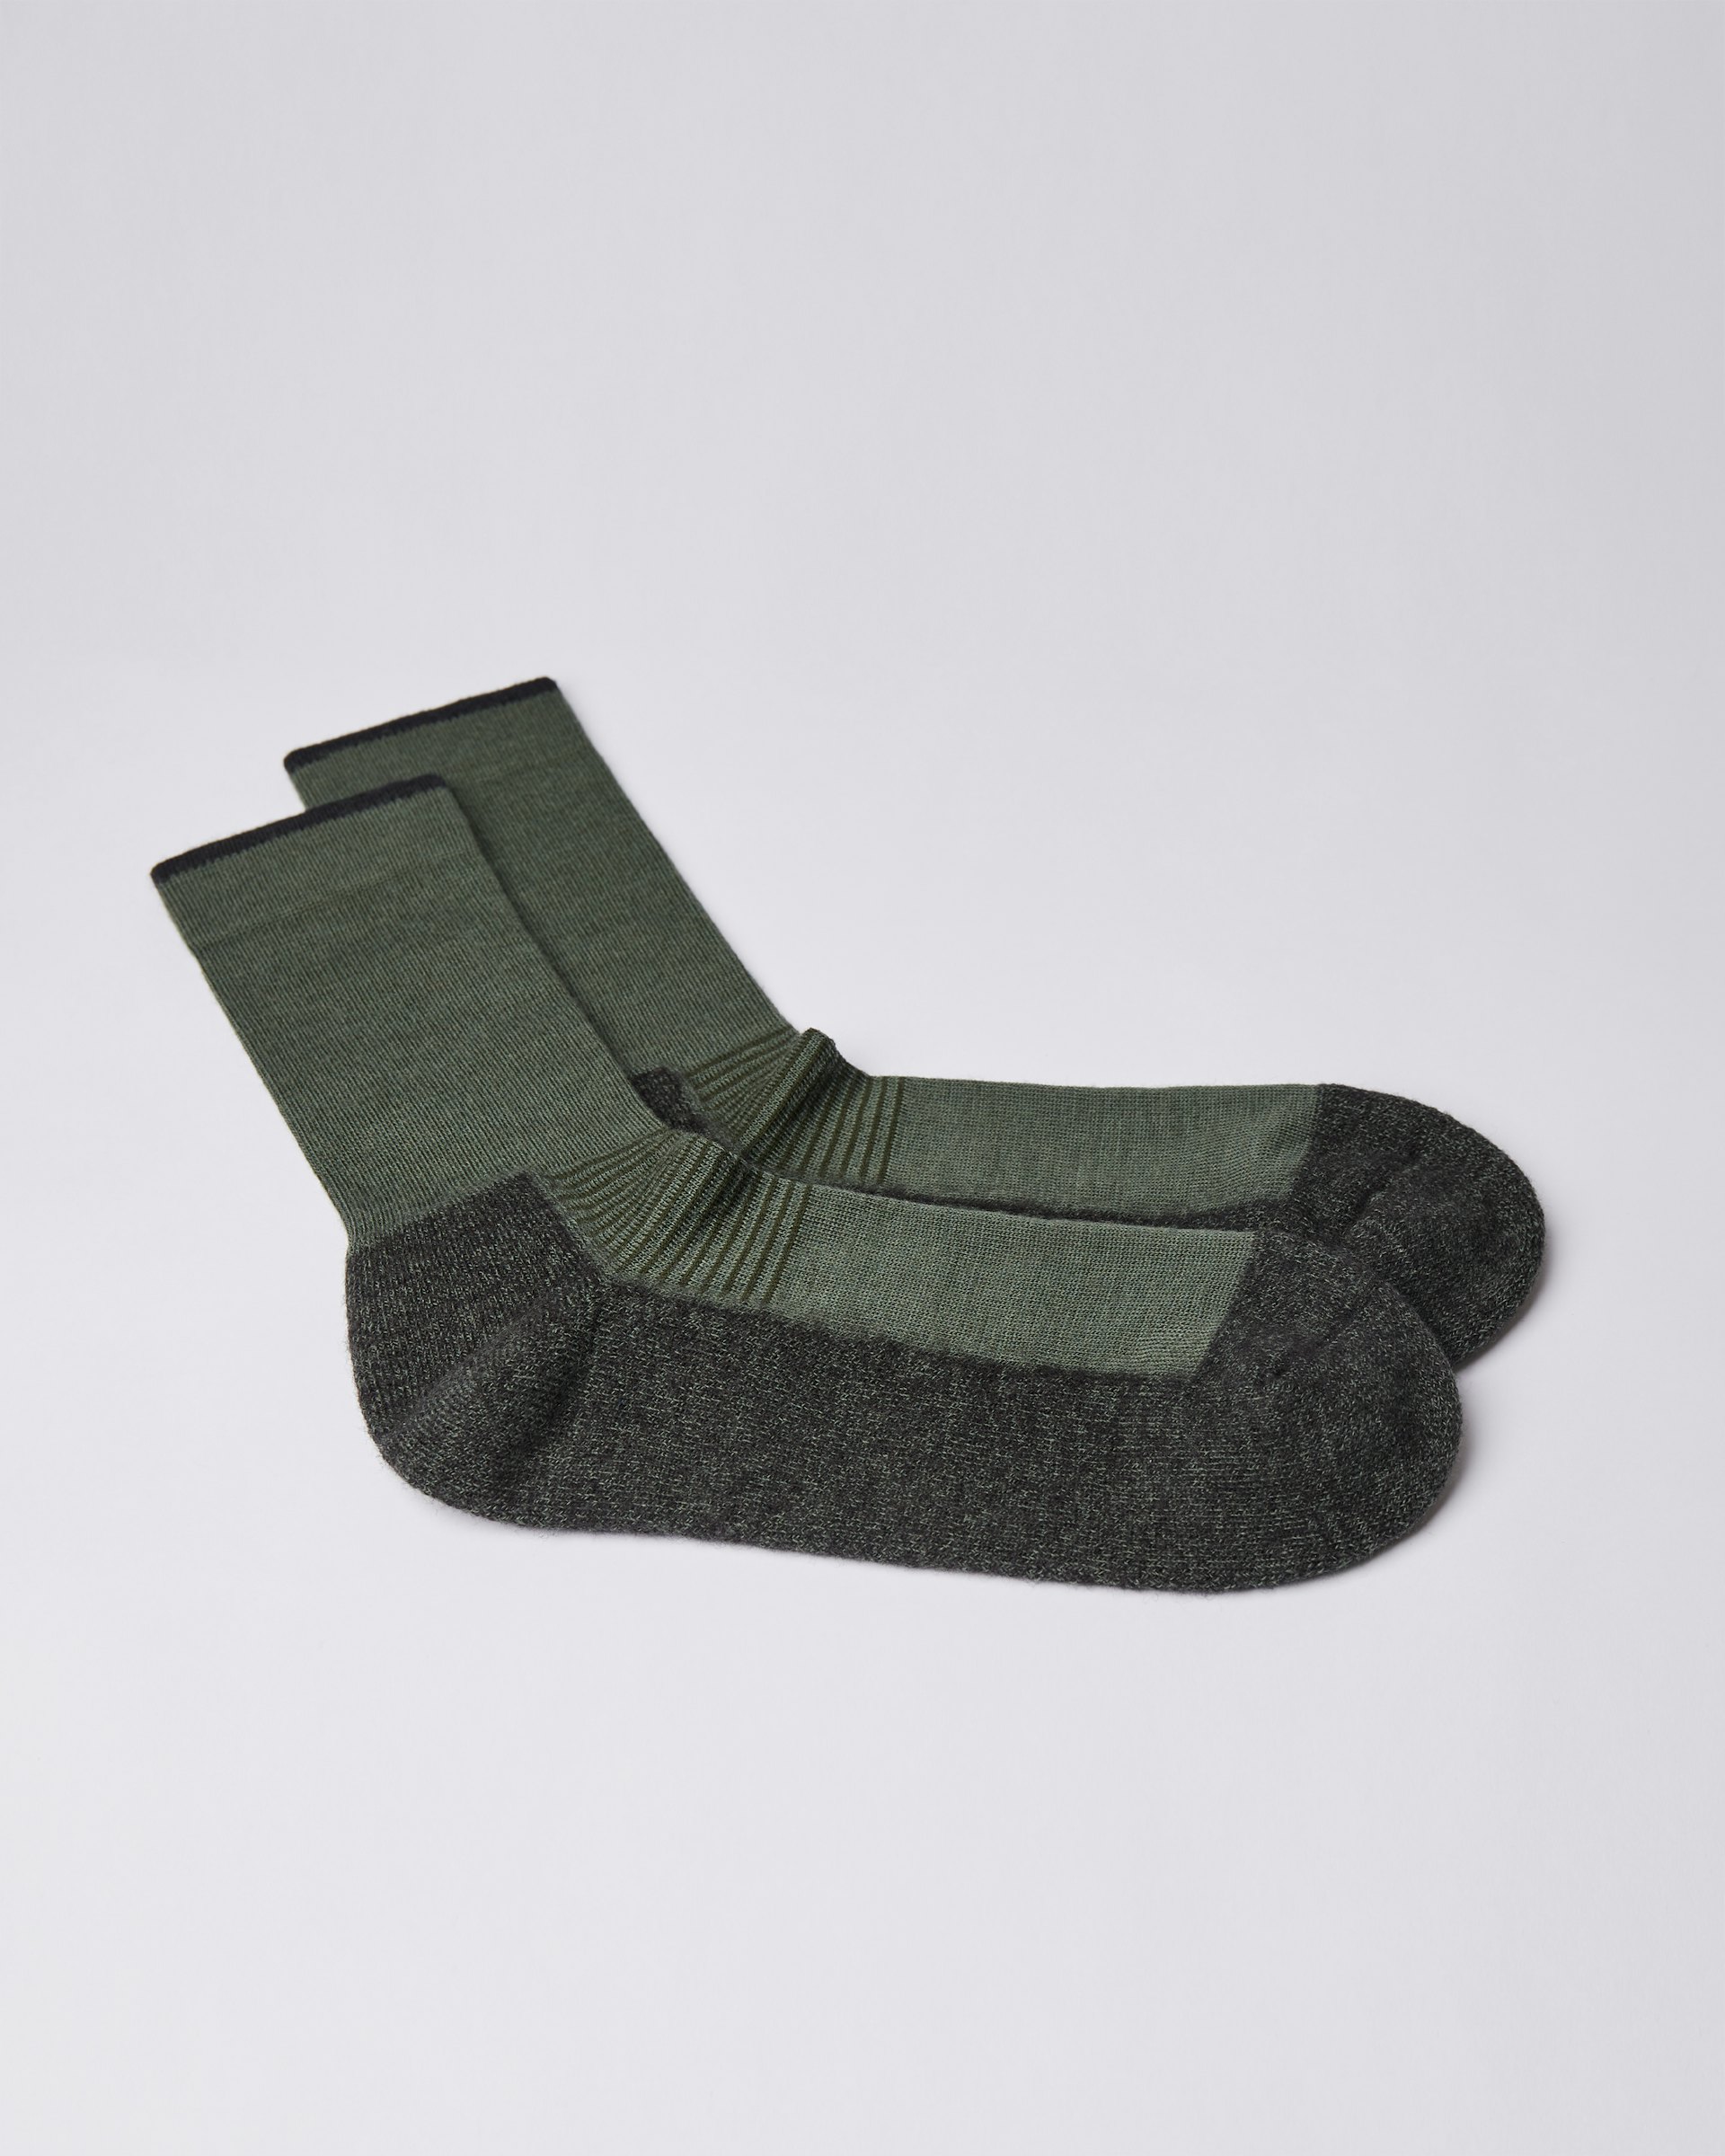 Wool Sock is in color green & green (3 of 3)